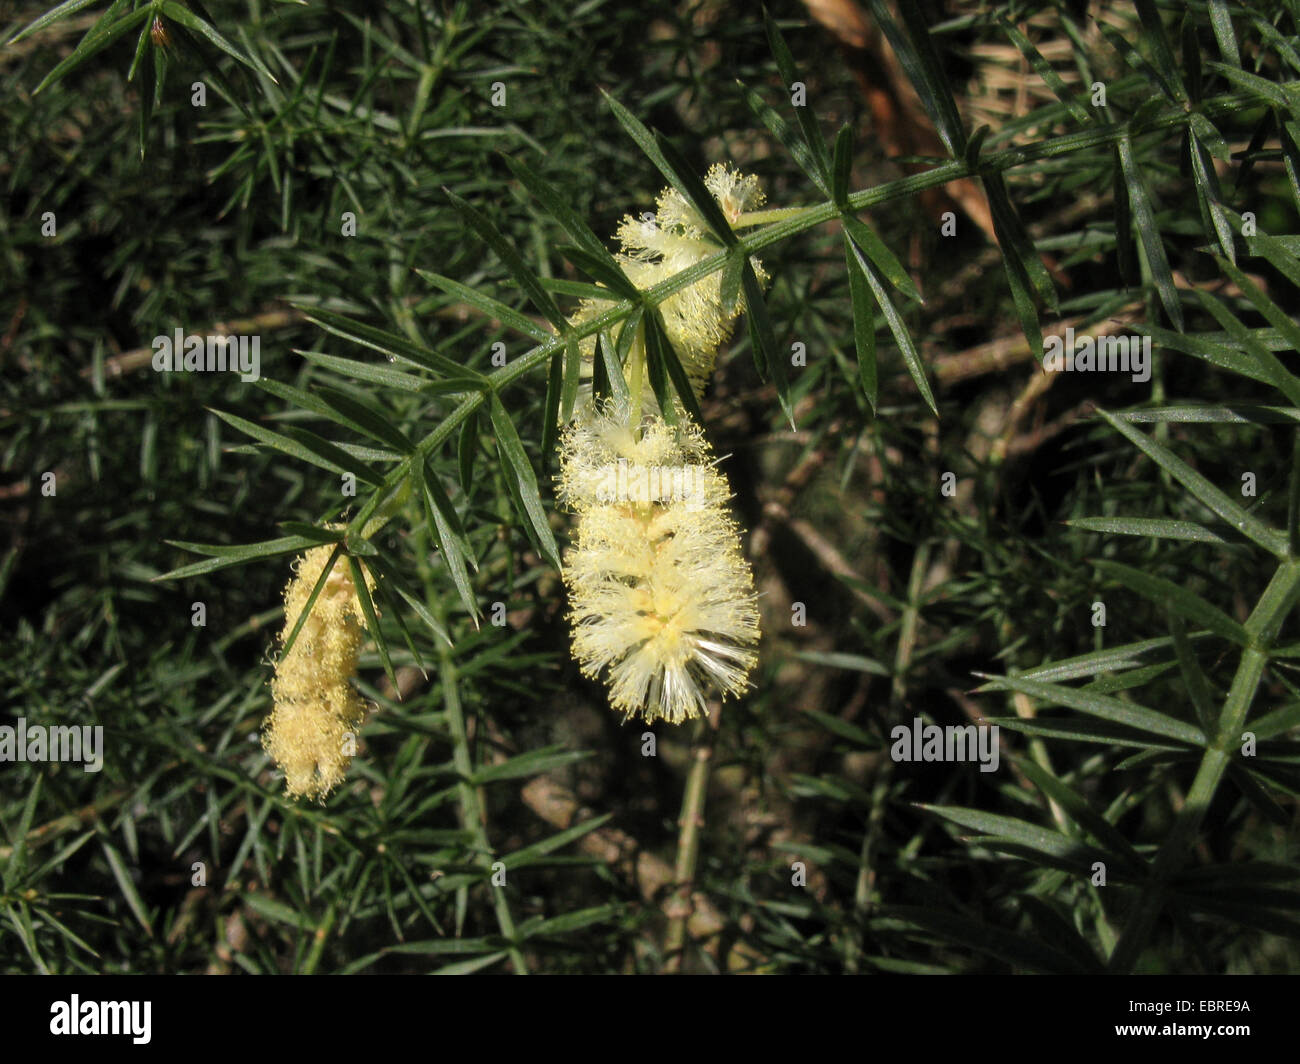 Prickly Moses, Prickly-leaved Wattle, Star-Leaved Acacia, Prickly Mimosa, Whorl-Leaved Acacia (Acacia verticillata), blooming branch Stock Photo